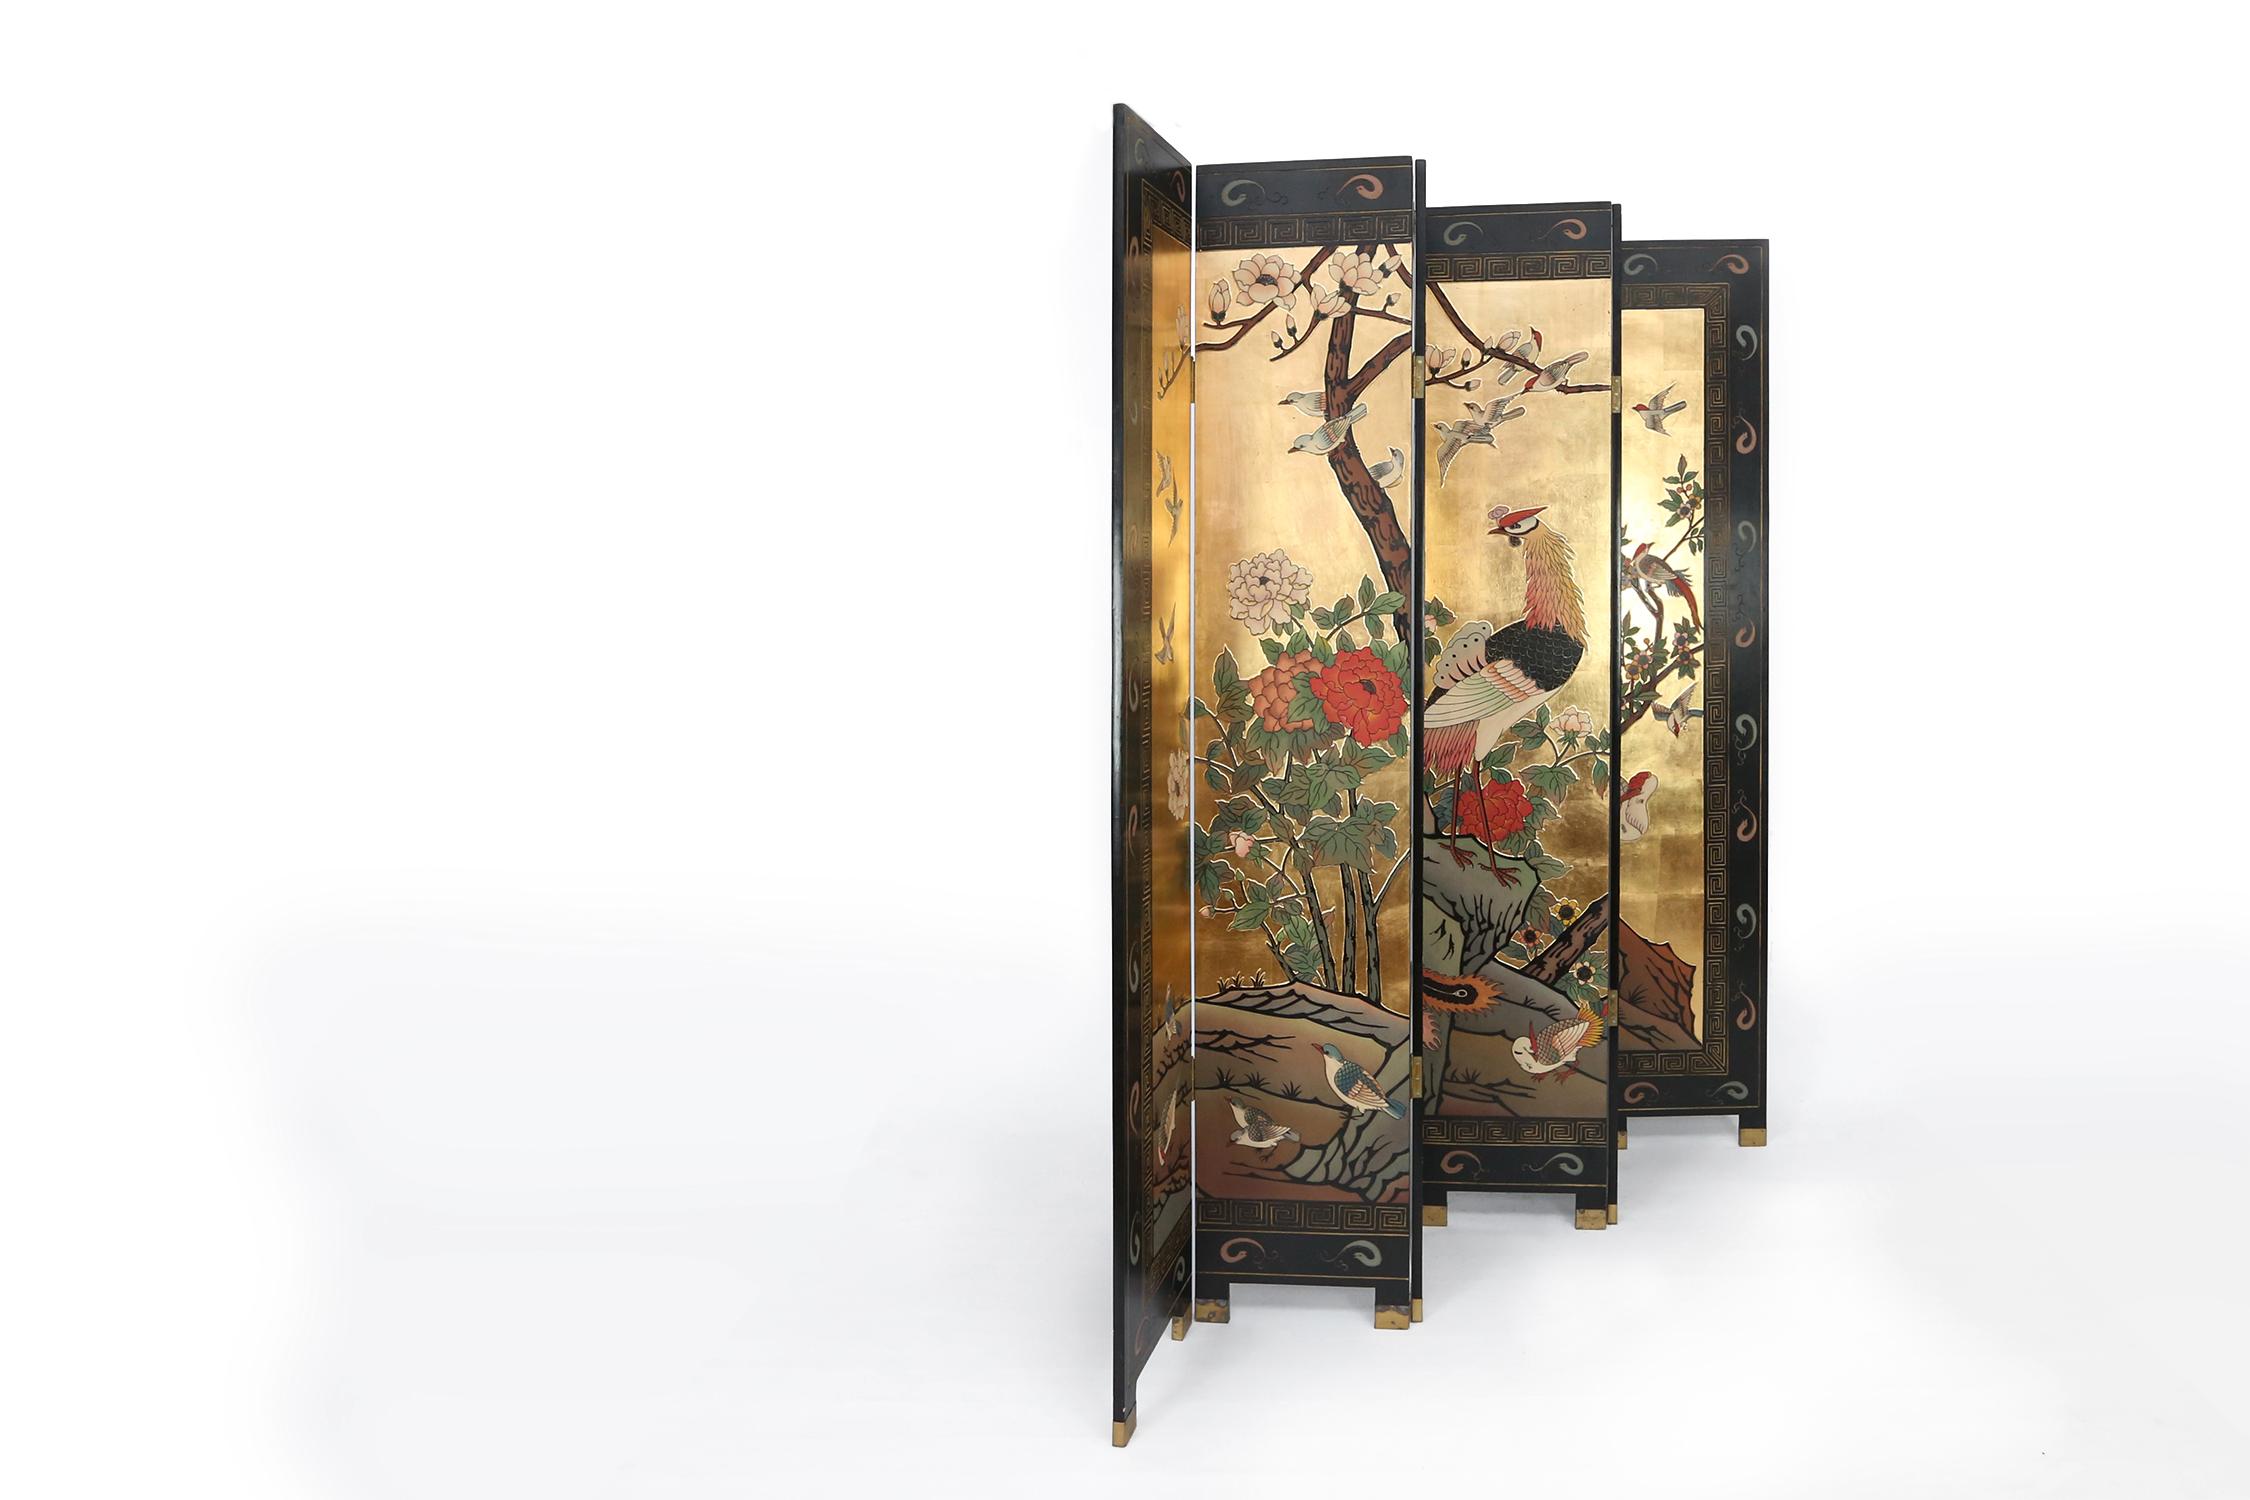 Stunning large black lacquered chinese folding screen/roomdivider with exception detailed paintings. Use as a room divider or as piece of art. The peaceful garden scenes, replete with birds, trees, flowers and leaves add a sense of tranquility to